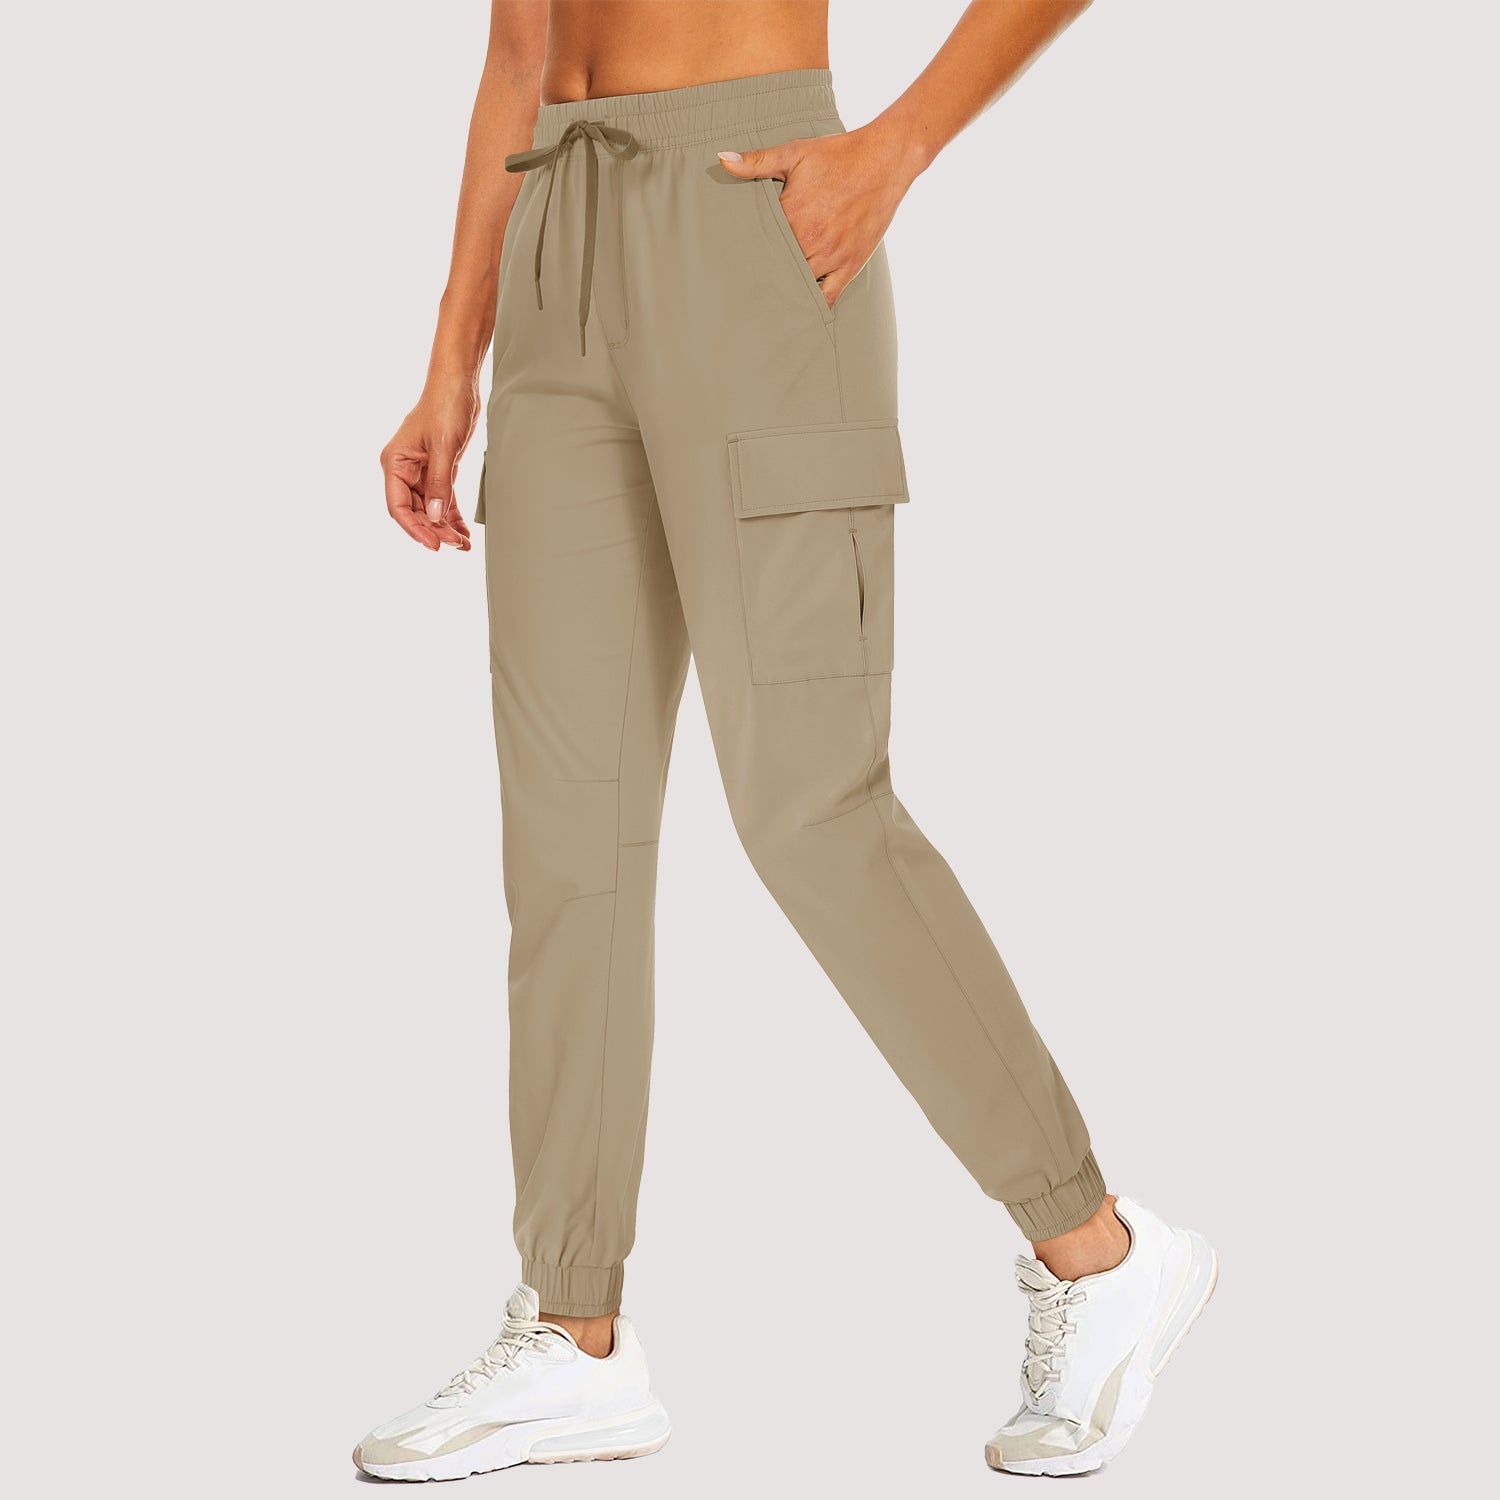 Women's Hiking Pants with 5 Pockets Quick Dry Sweatpants Running Pants